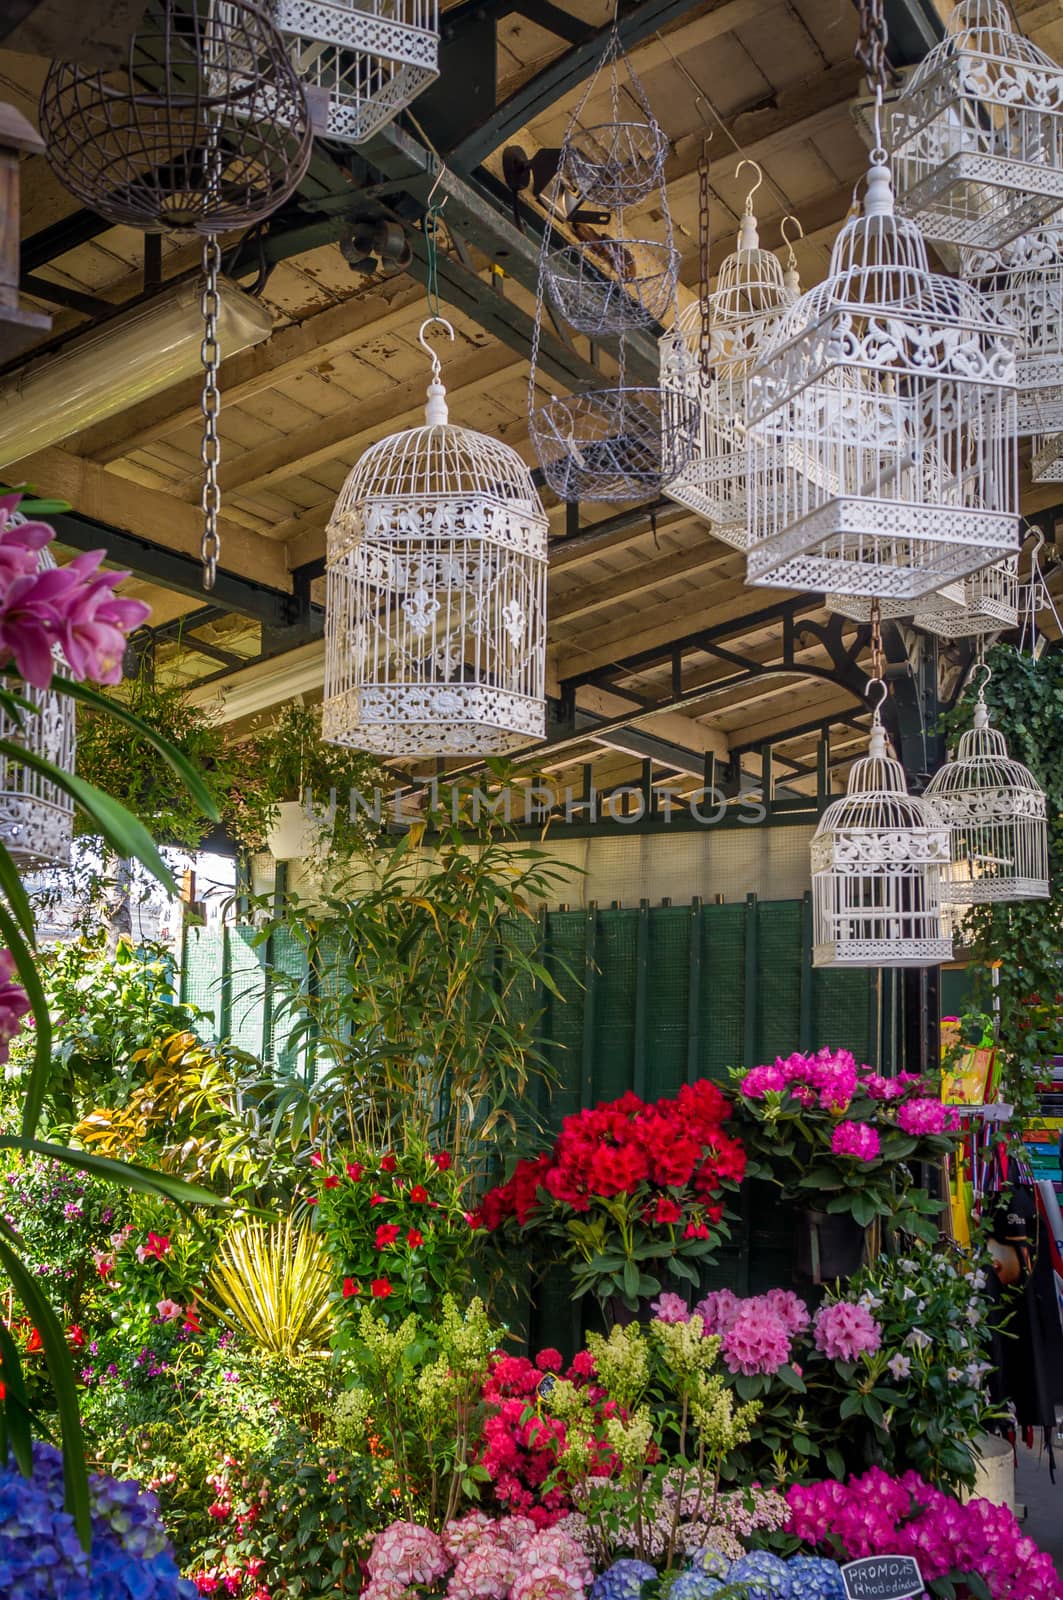 Flowers and bird cages in the marche aux fleurs in Paris